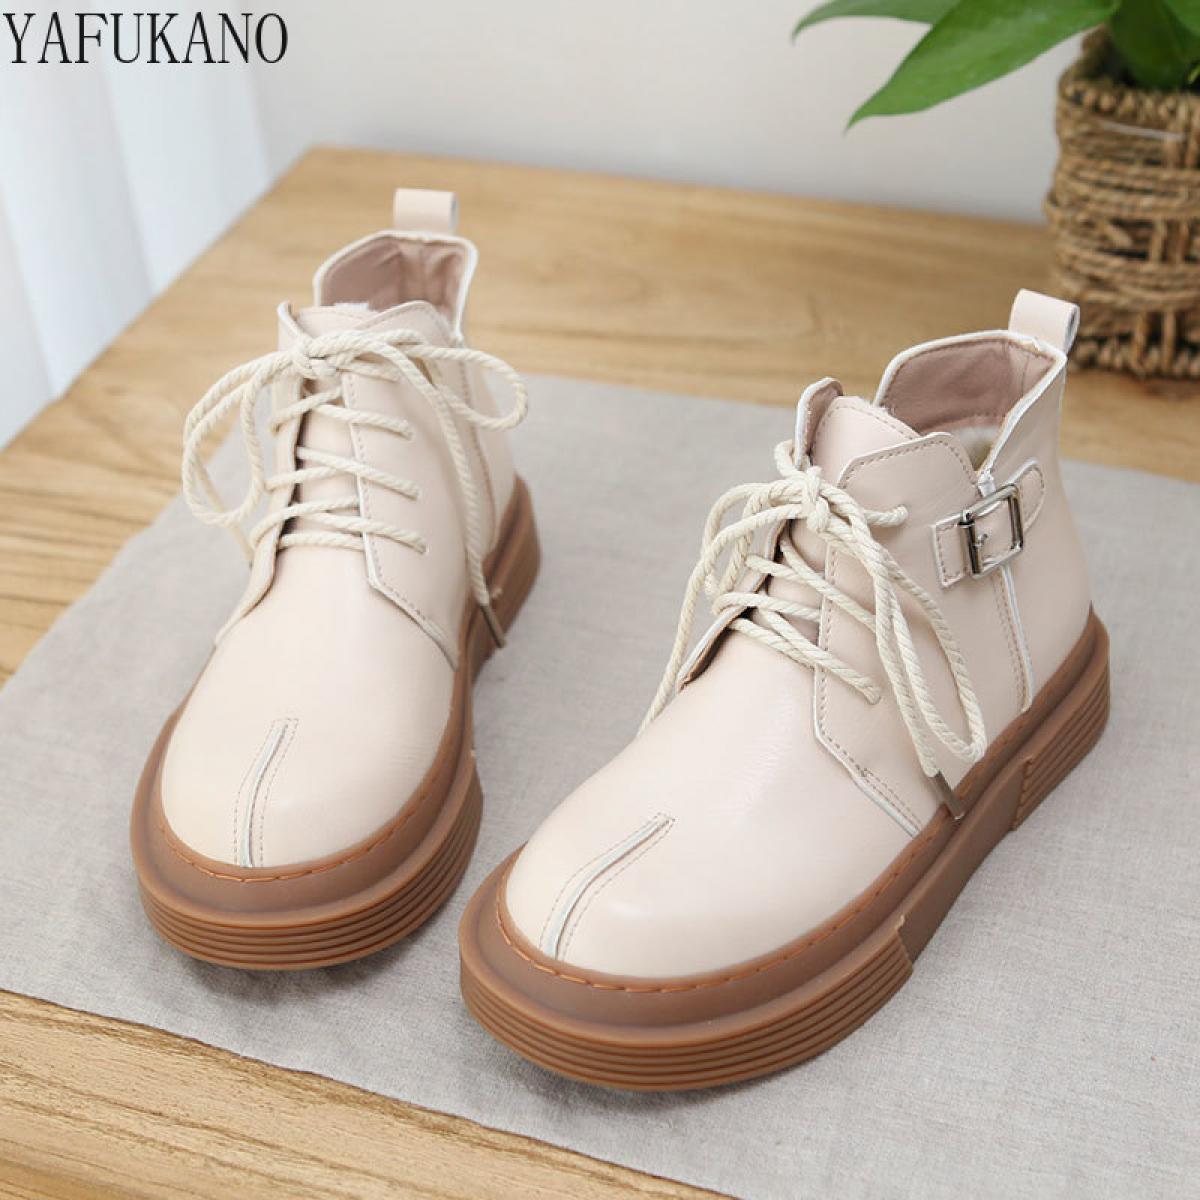 Literary Retro Big Head Women Boots Thick Sole Lace Up Casual Warm Cotton Boots Original Handmade Short Boots Women Ankl